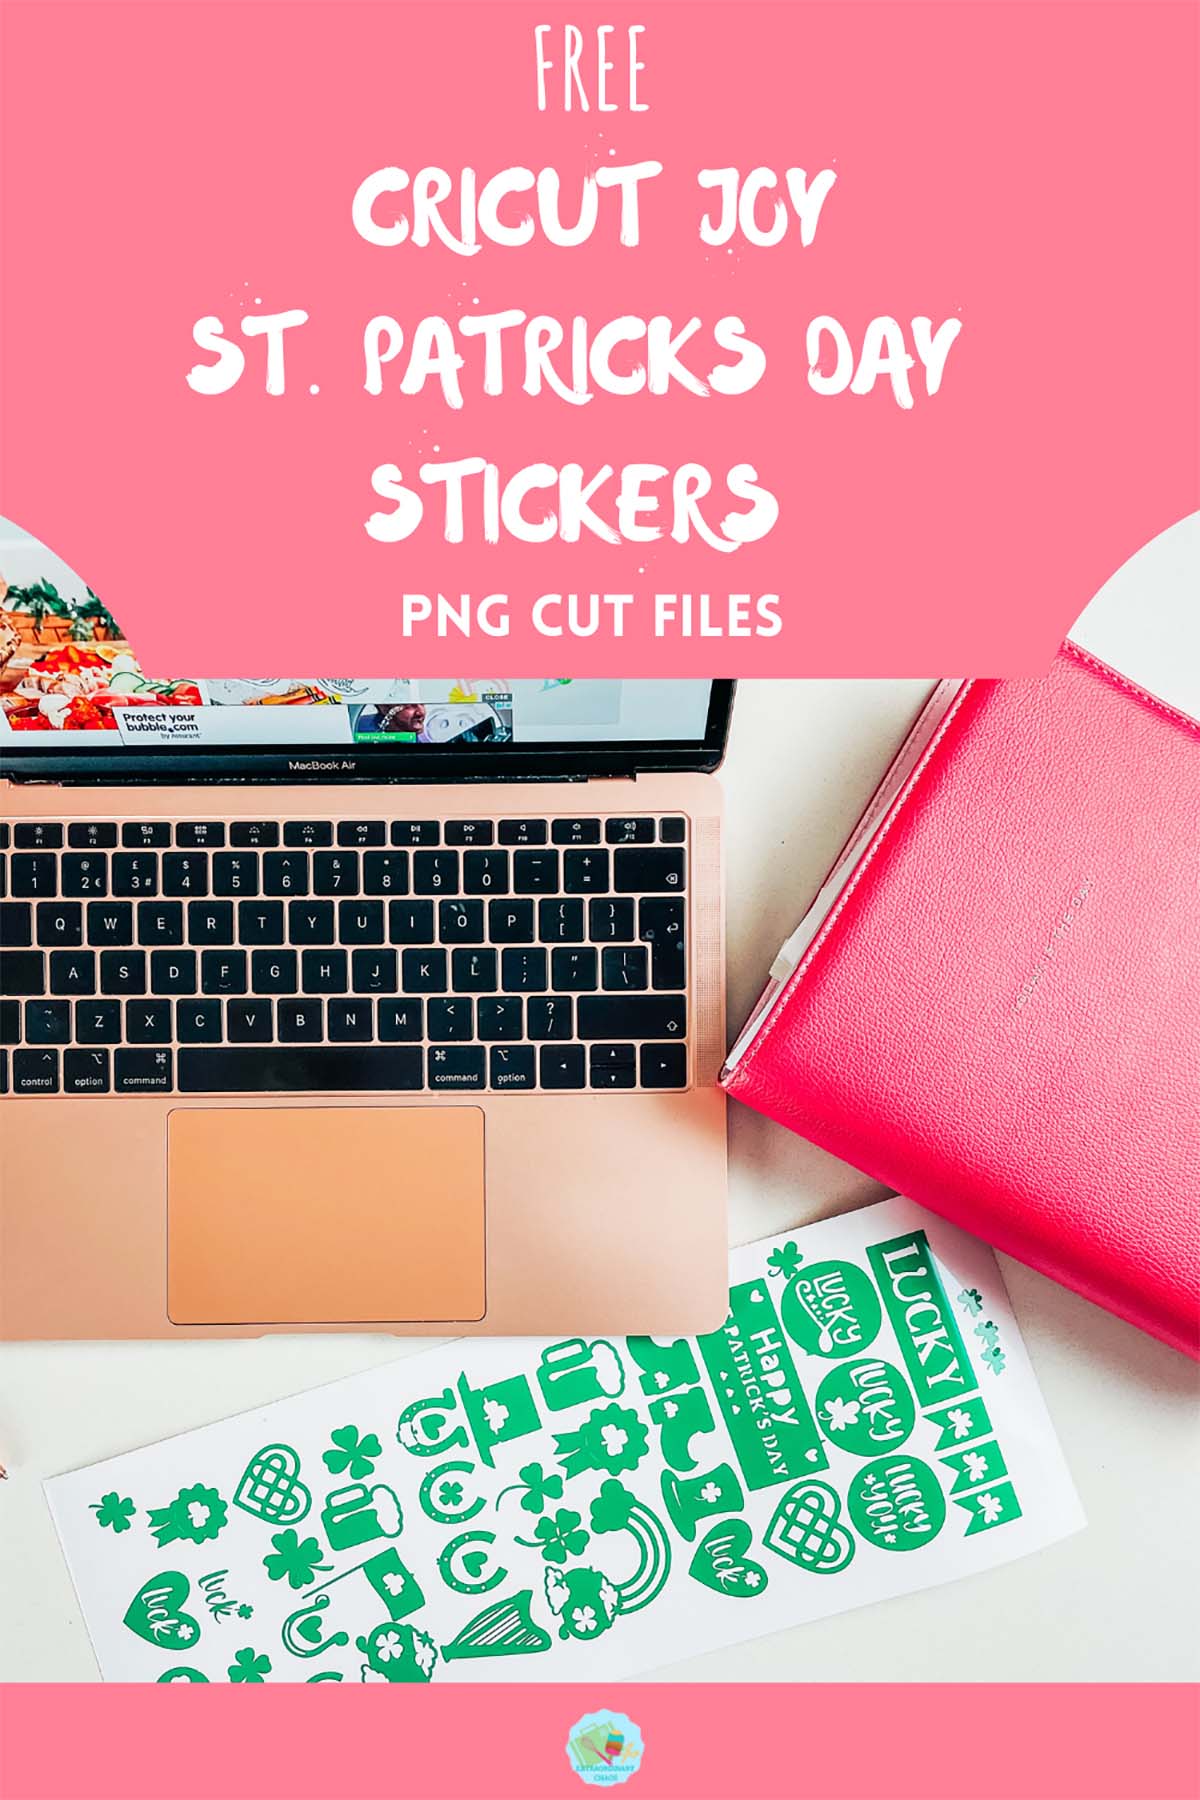 Free download for a Cricut joy st Patricks Day stickers for Crafting and scrapbooking